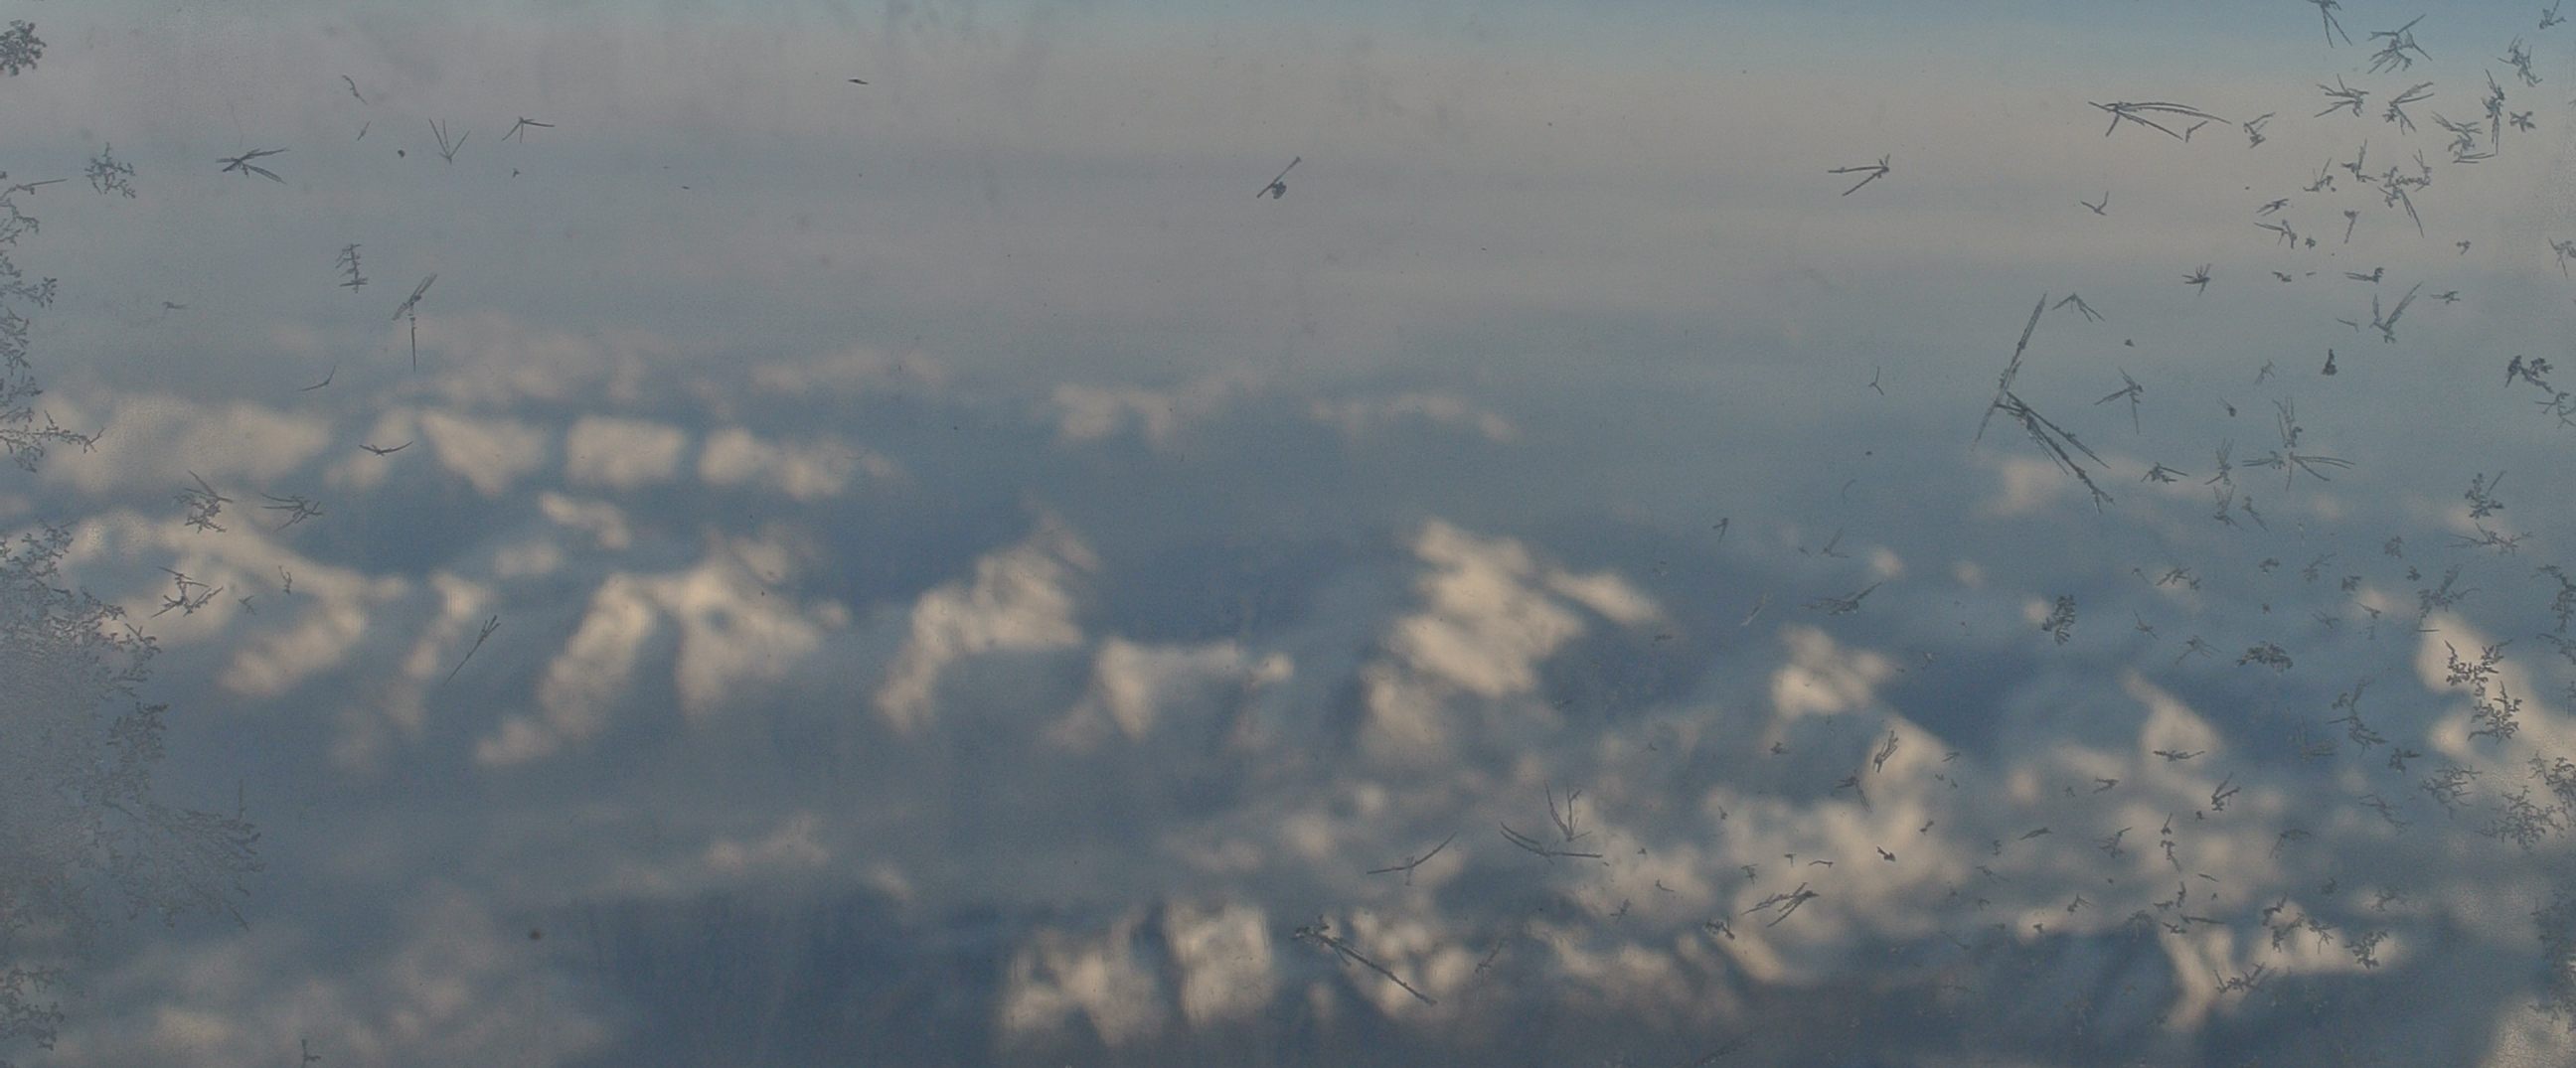 Frost accumulating on the outside of our plane window, above the Swiss Alps.